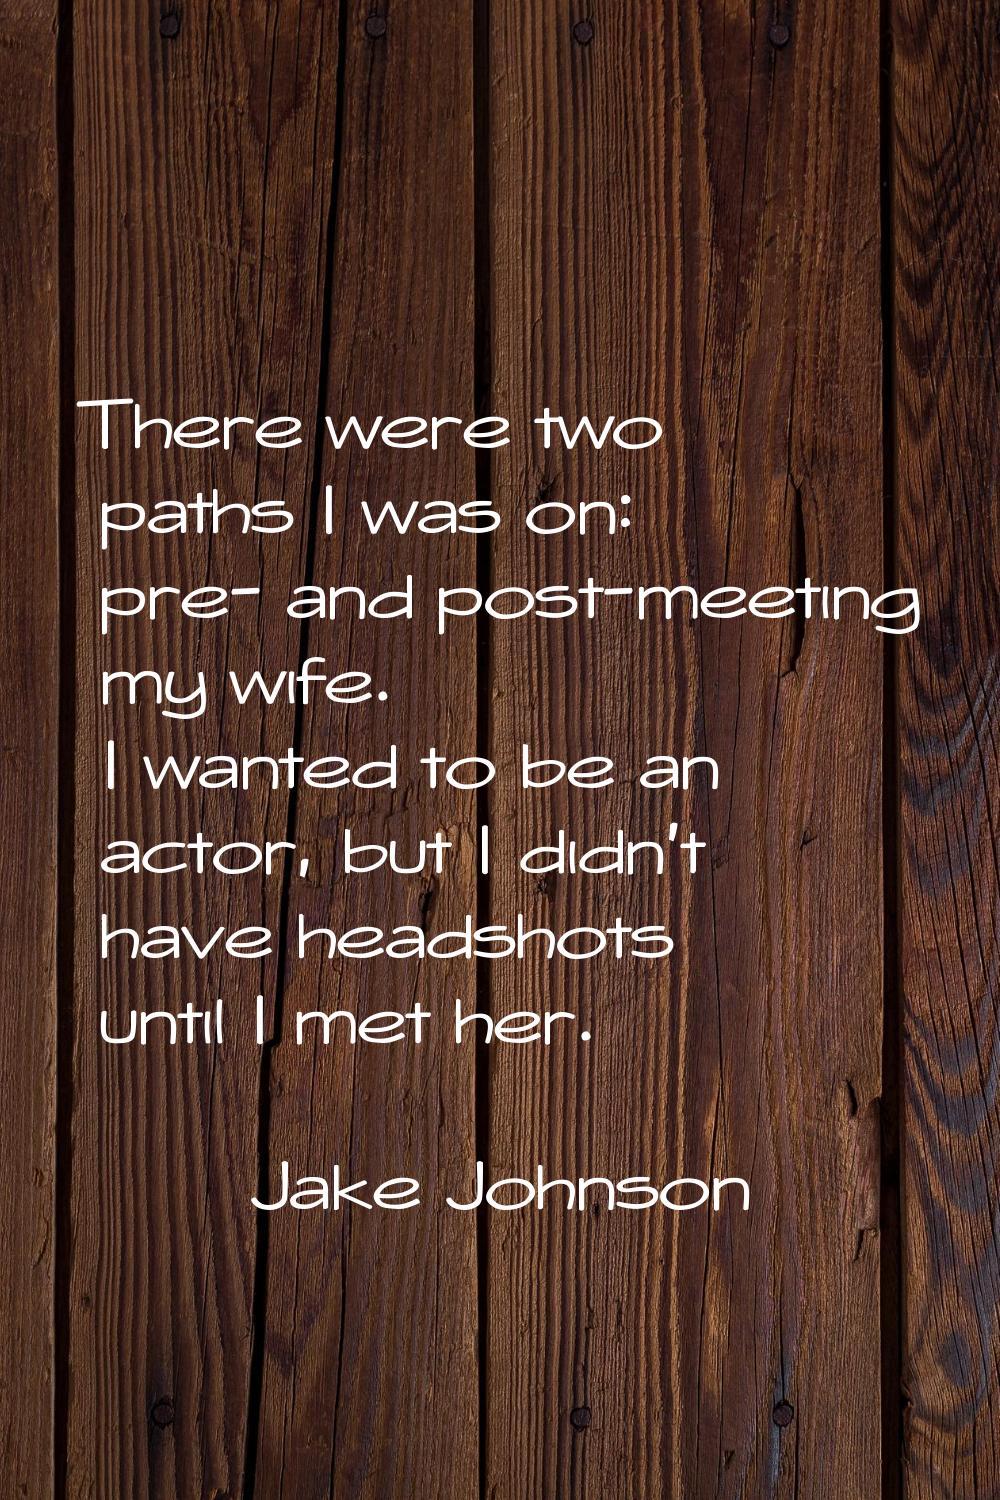 There were two paths I was on: pre- and post-meeting my wife. I wanted to be an actor, but I didn't